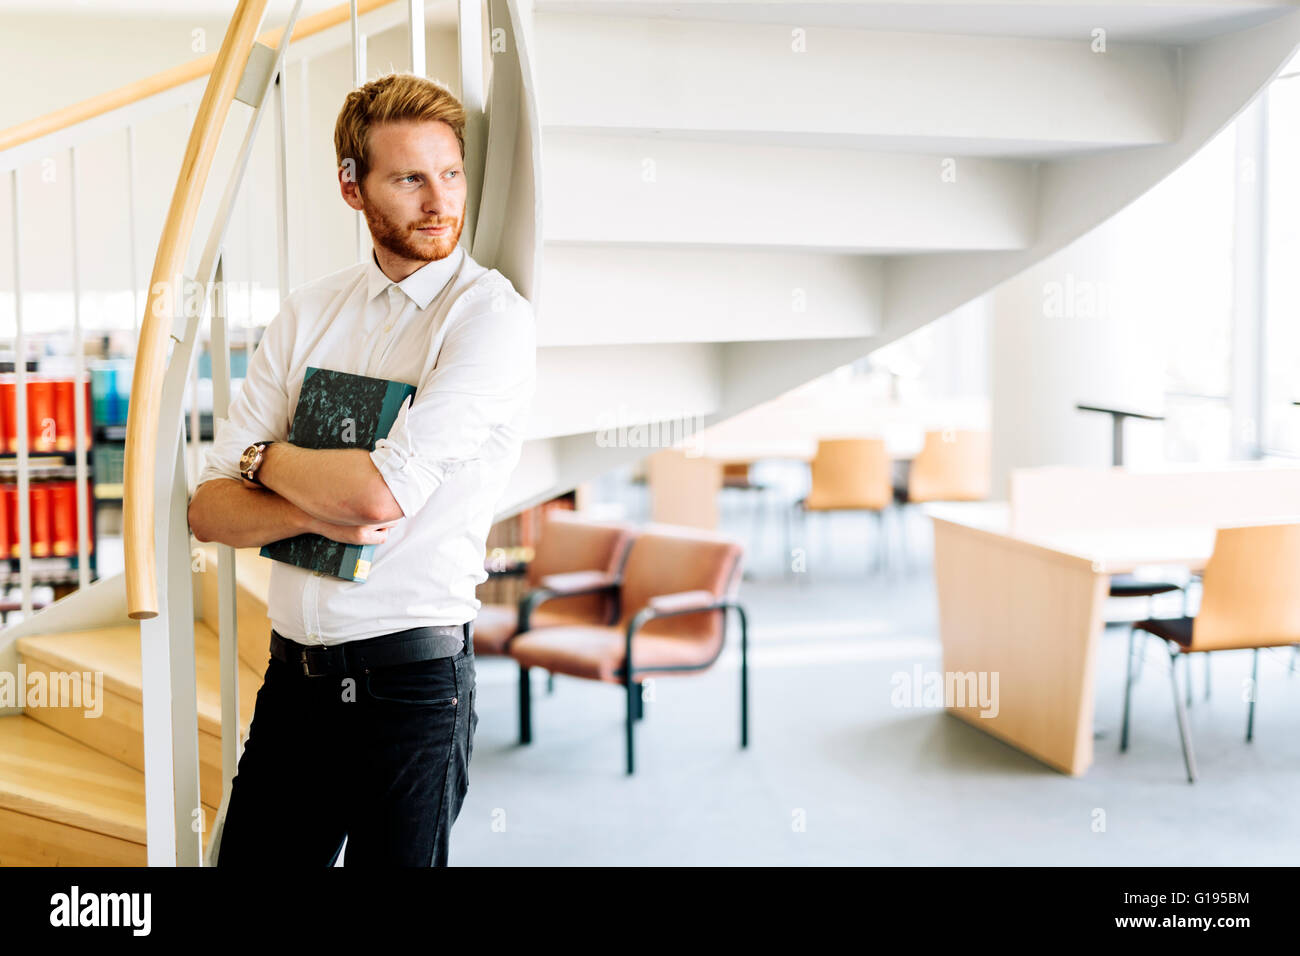 Handsome smart guy reading a book in a library Stock Photo